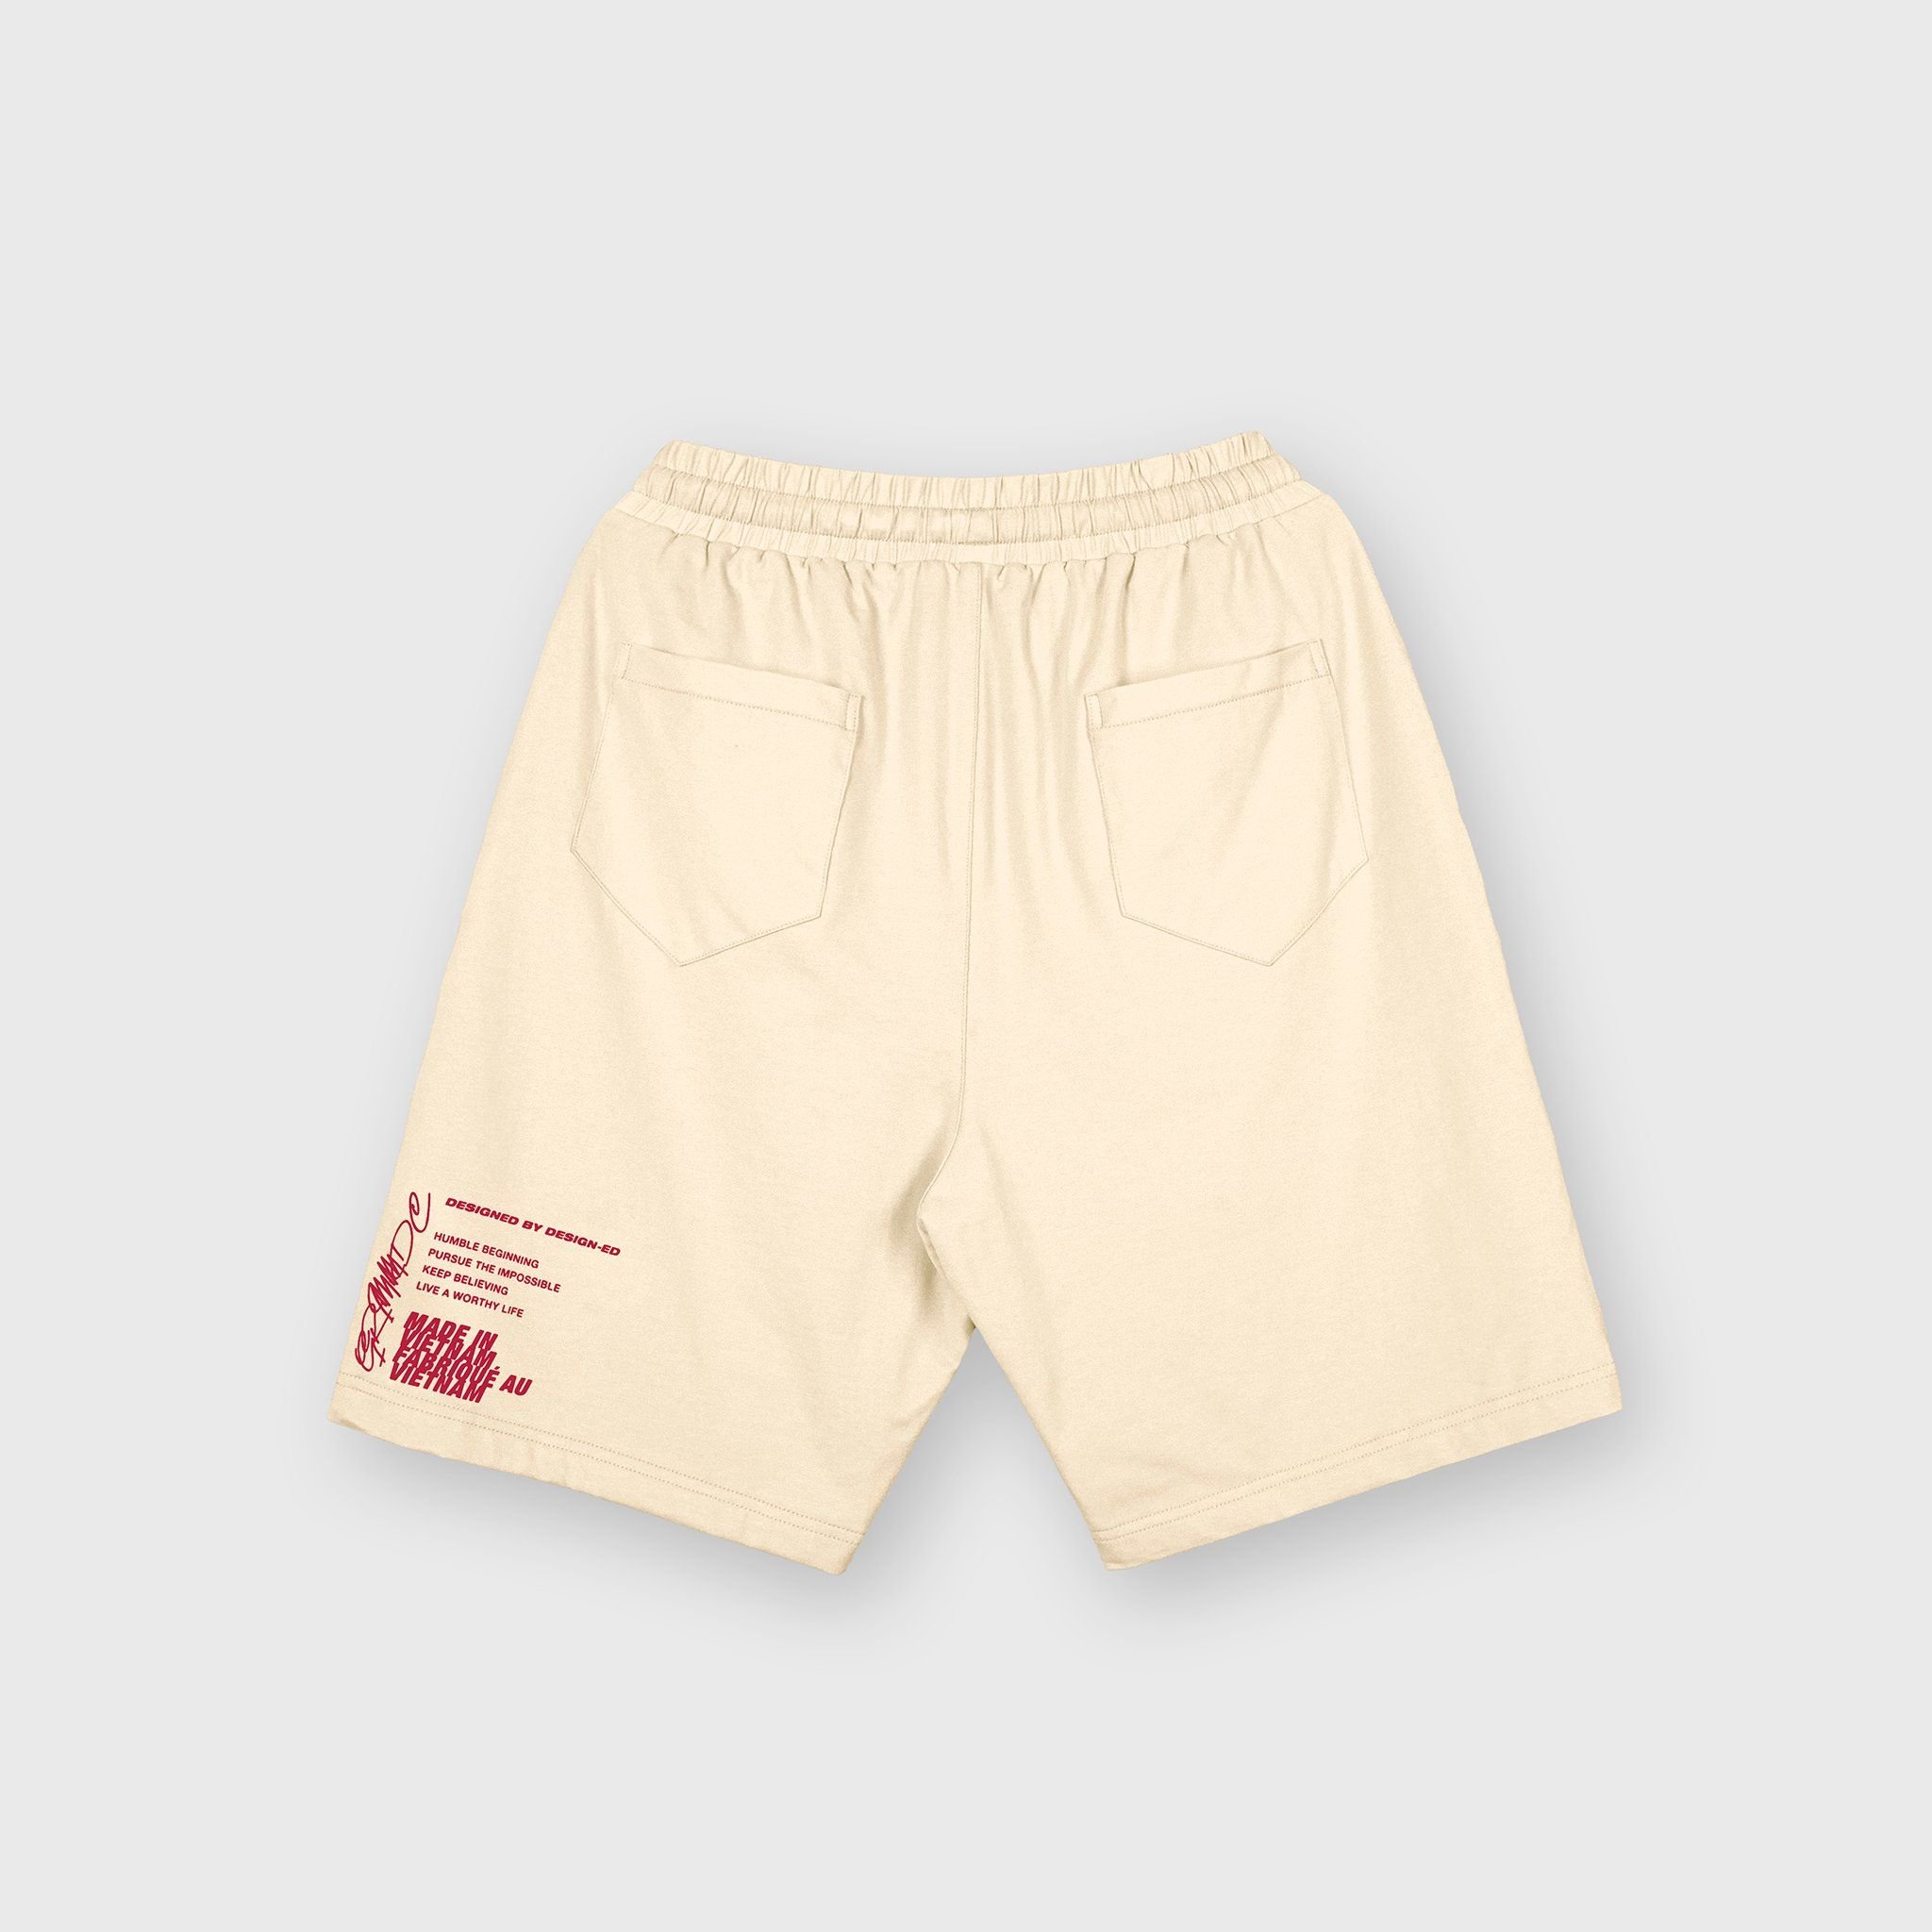 Worthy life shorts // Creamy Butter